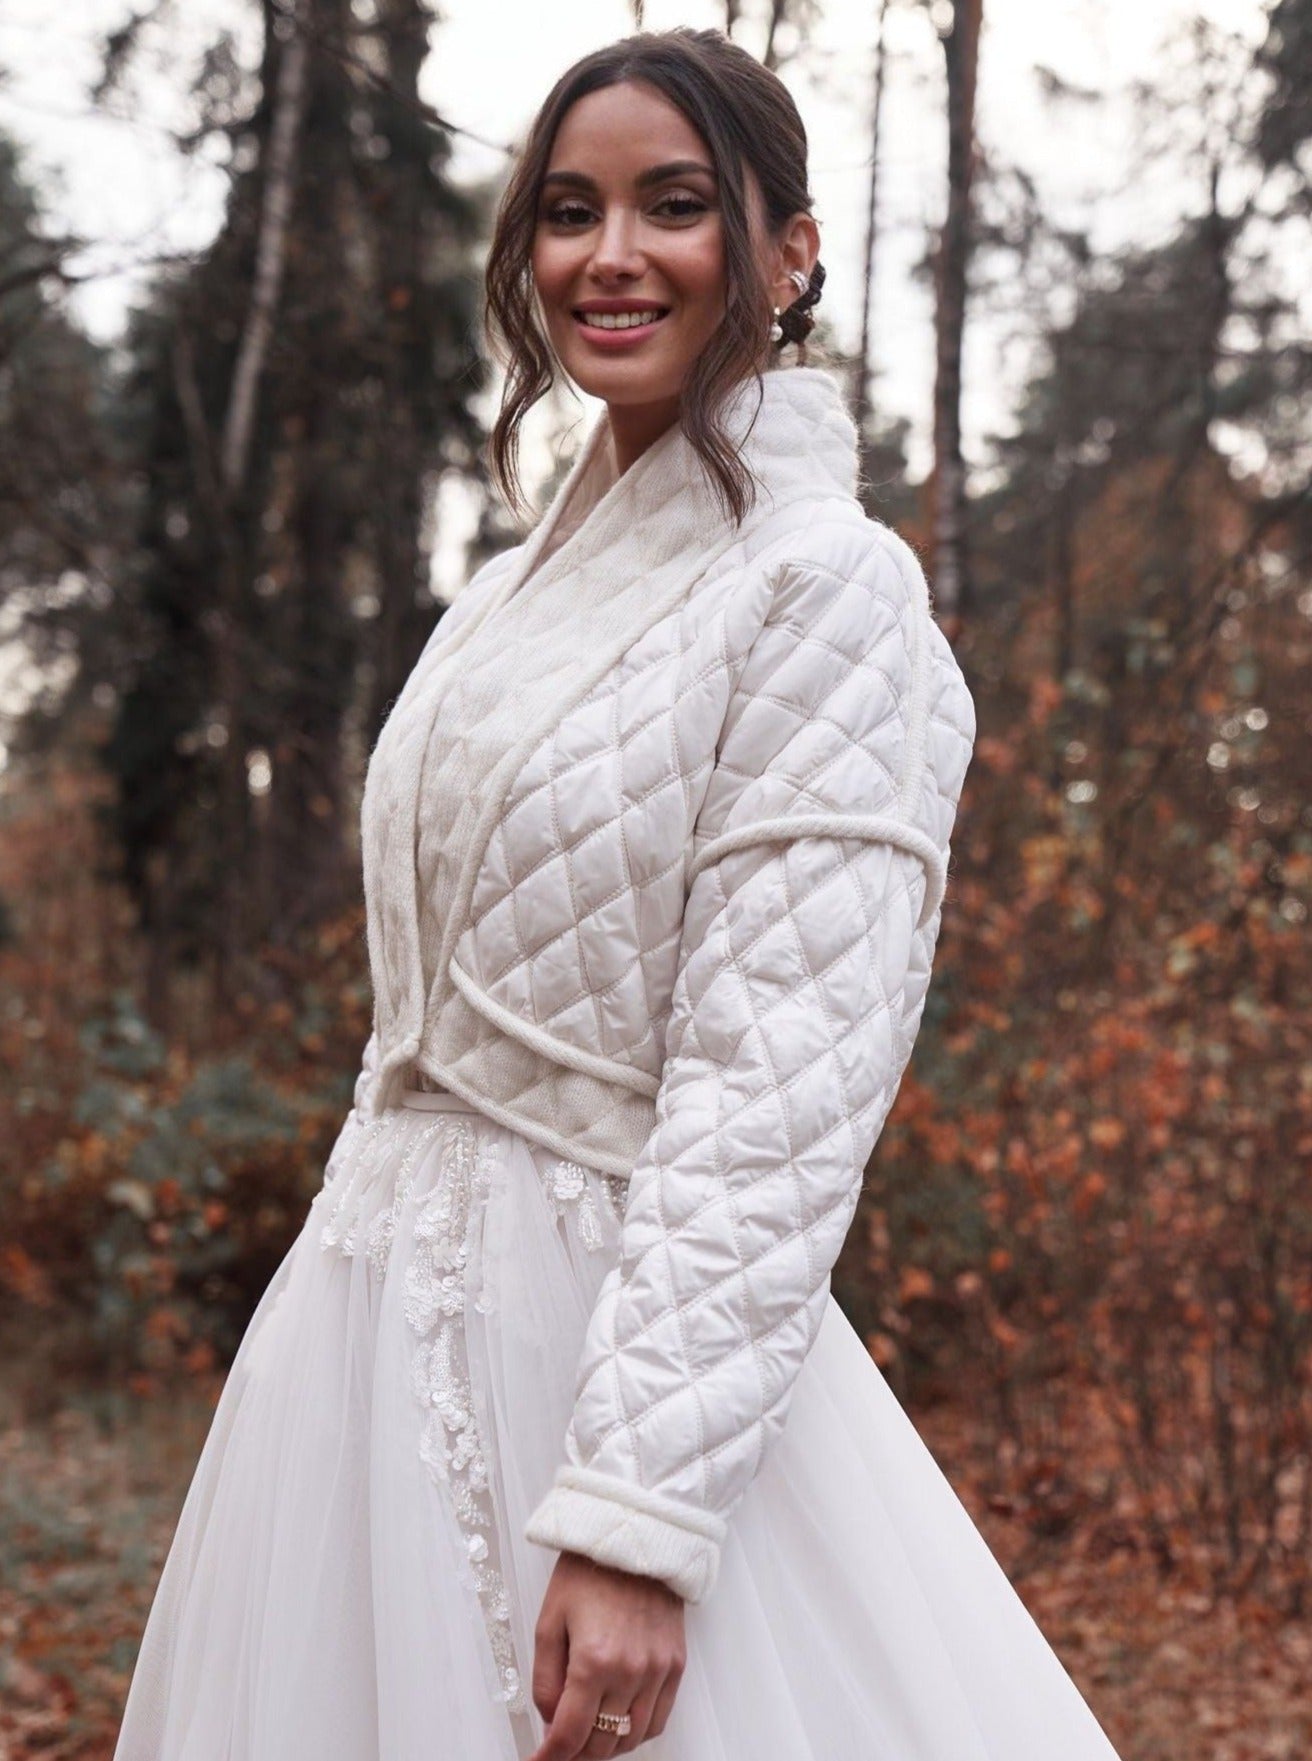 Reversible Quilted Wool Ivory Bridal Coat for a Chic Winter Wedding